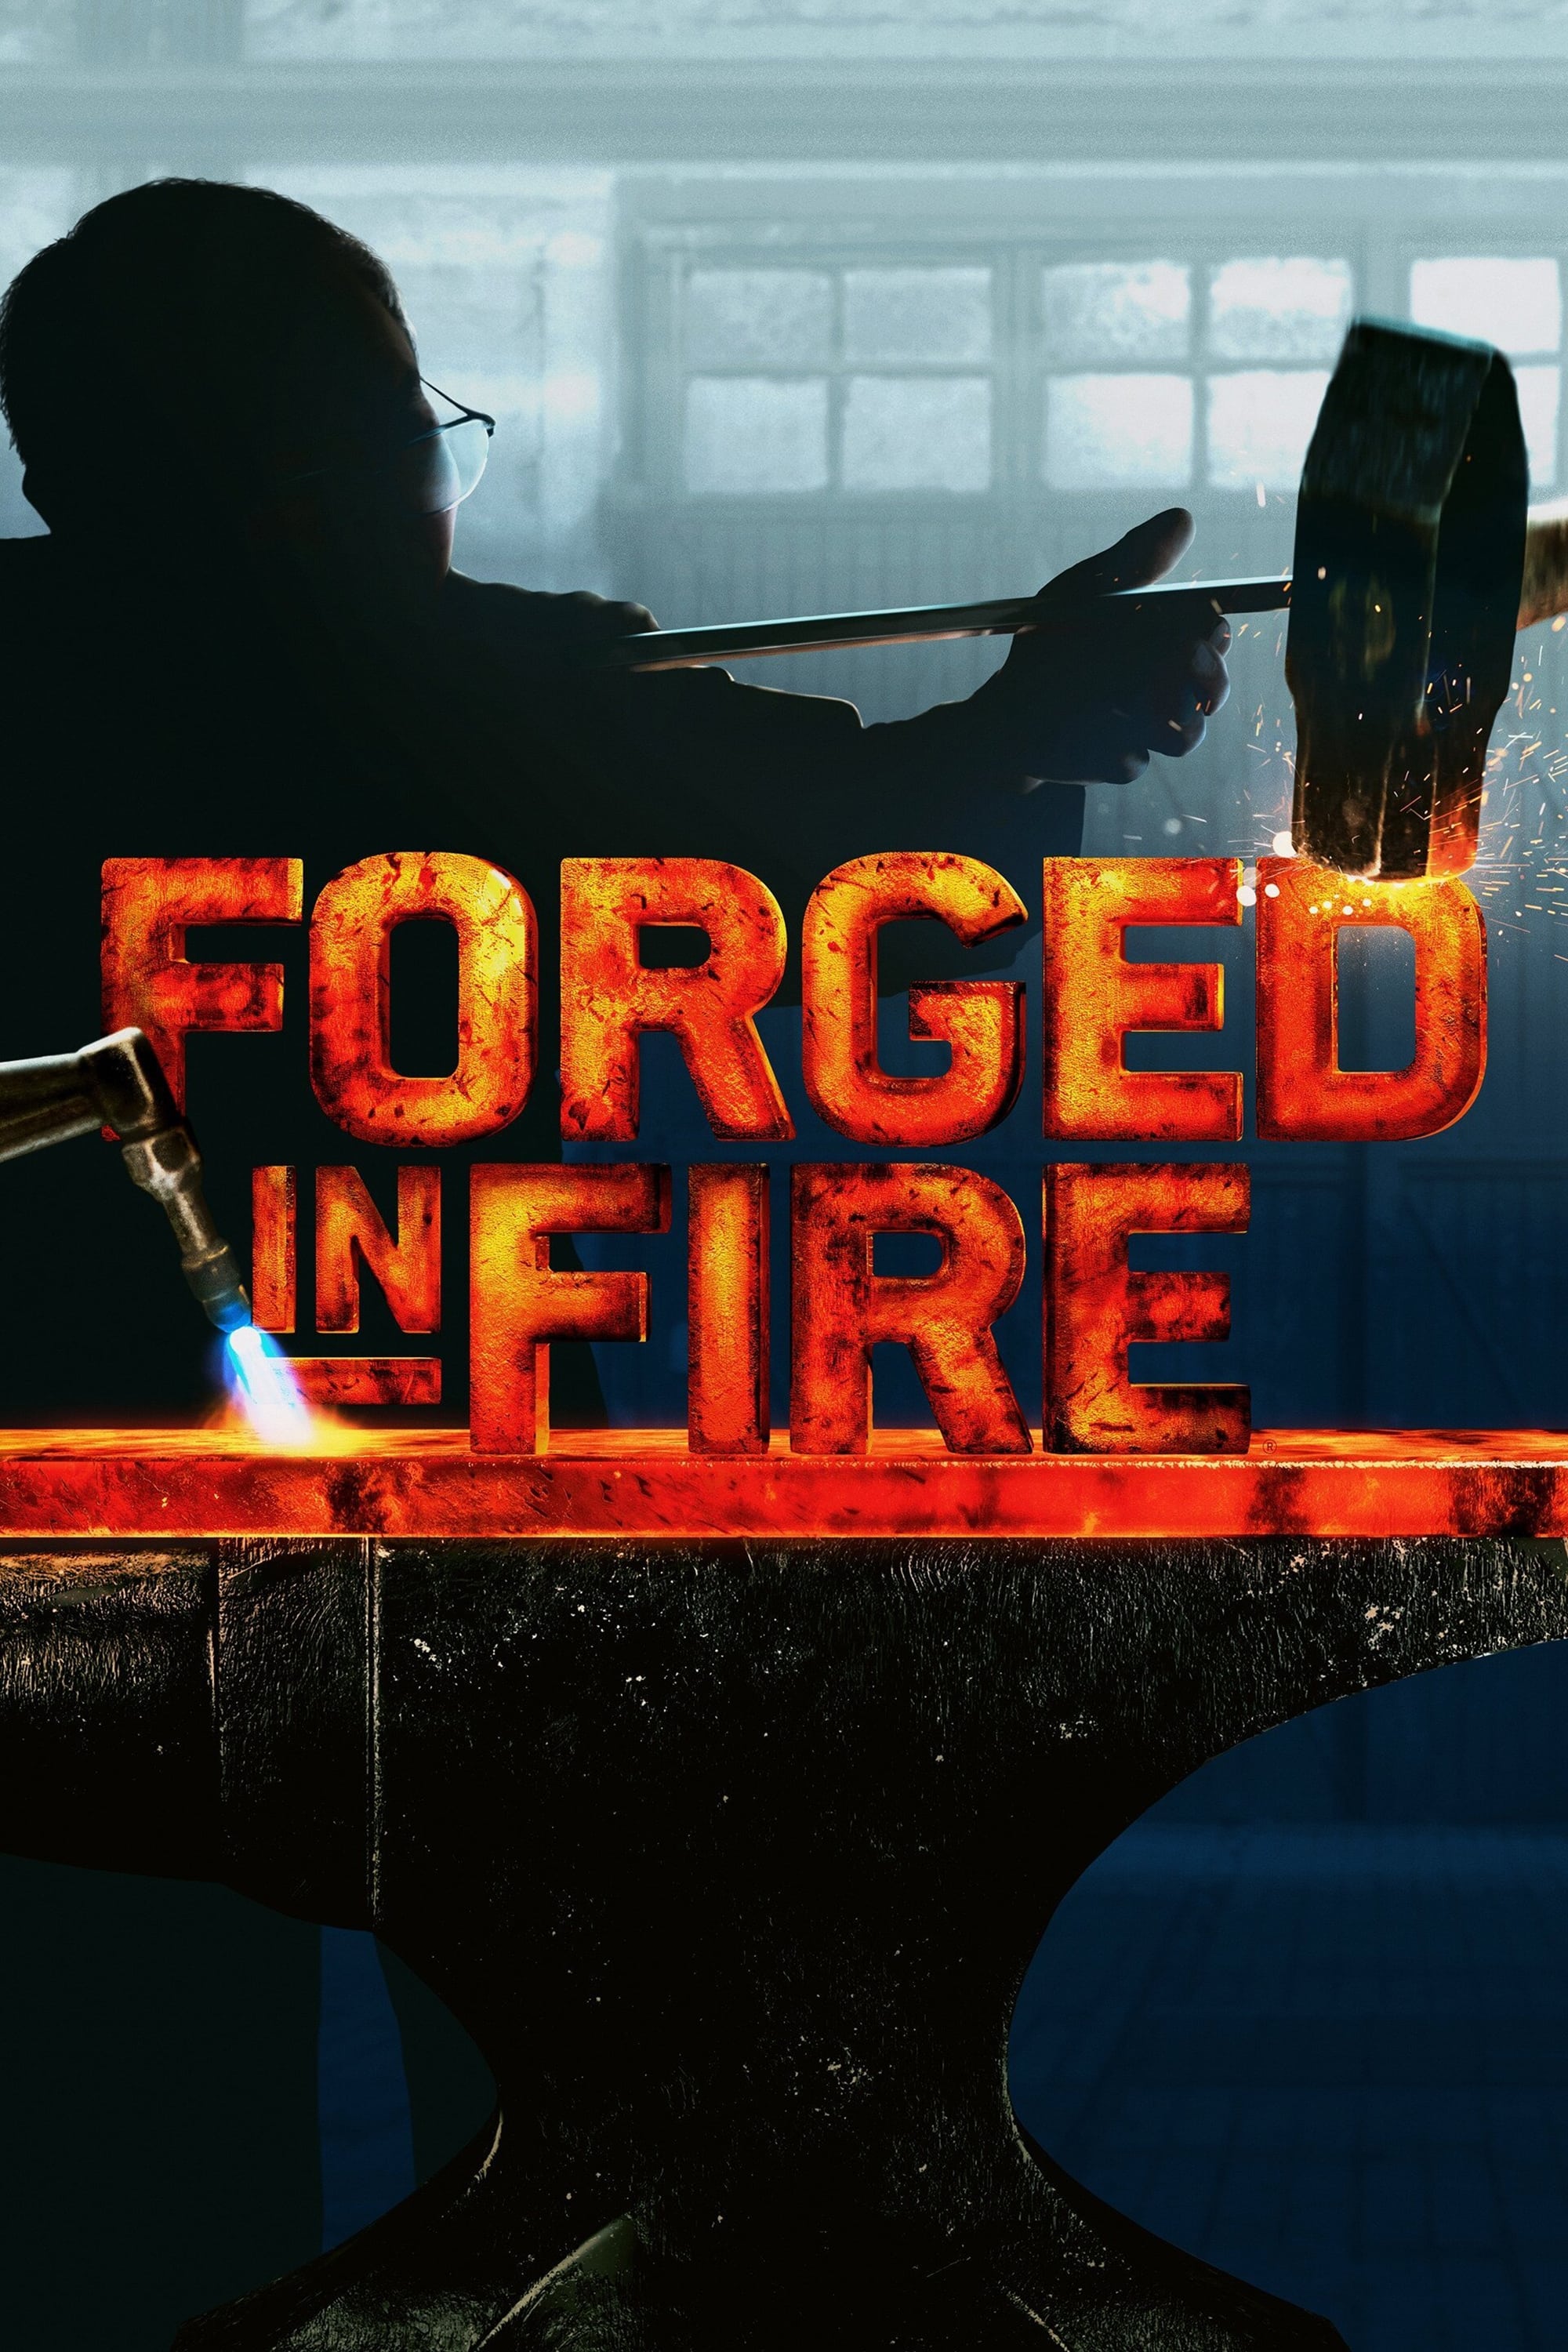 Forged in Fire (2015)